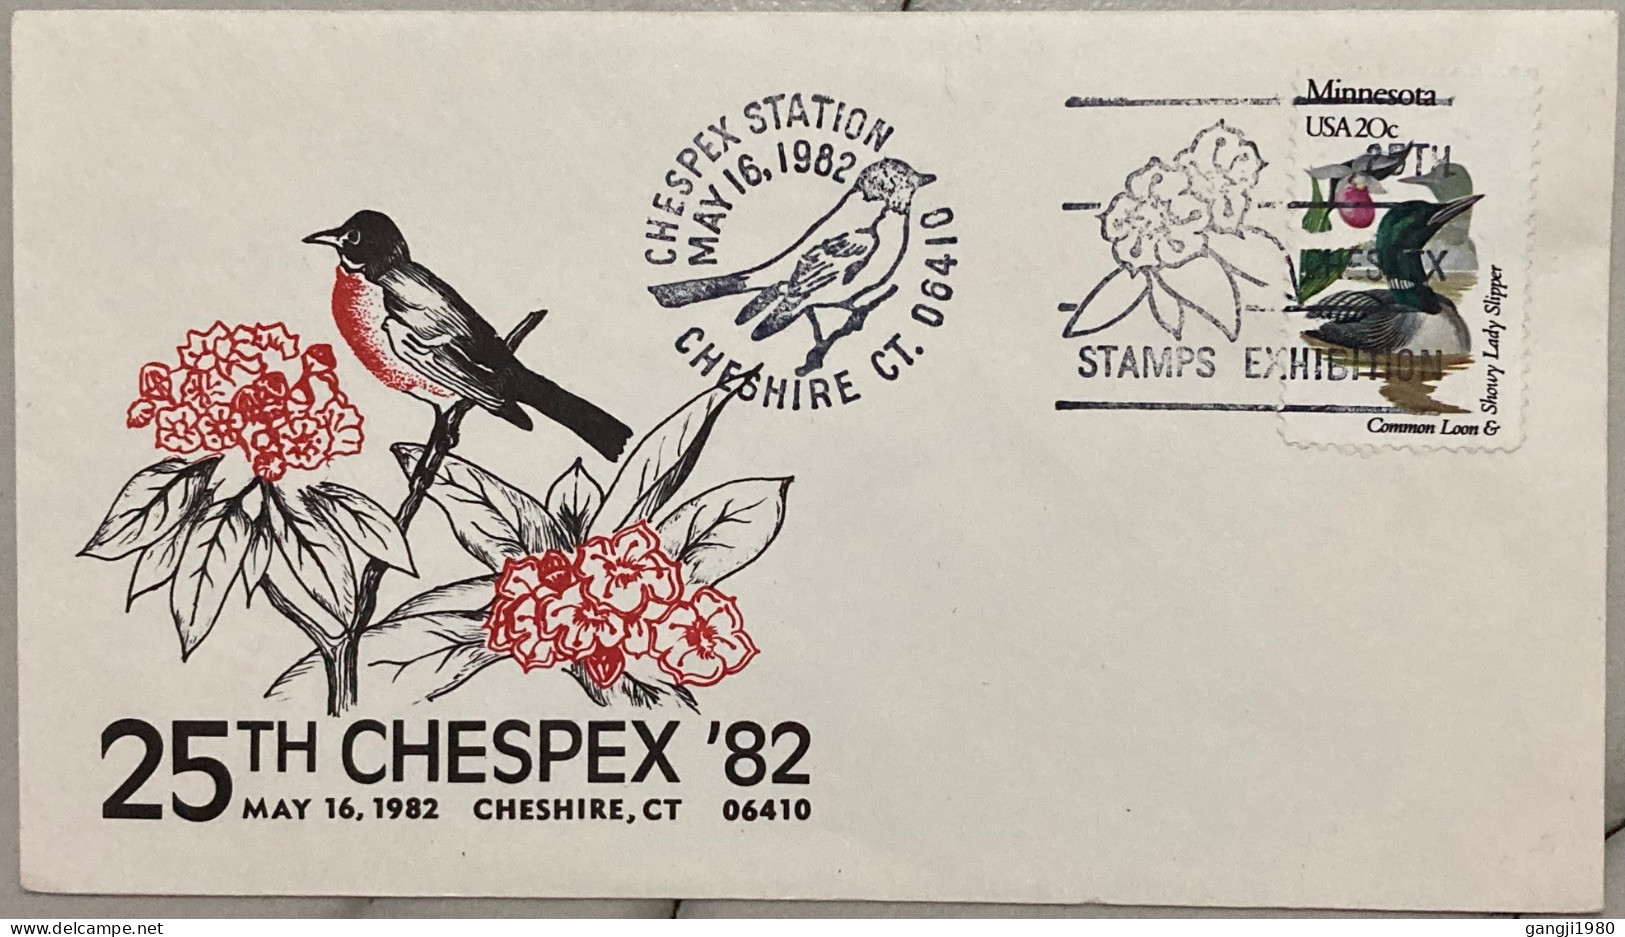 USA 1982, SPECIAL ILLUSTRATED, BIRD COVER, CHESPEX 1982, CHESHIRE CITY. FLOWER PLANT & BIRD PICTURE CANCEL - Werbestempel